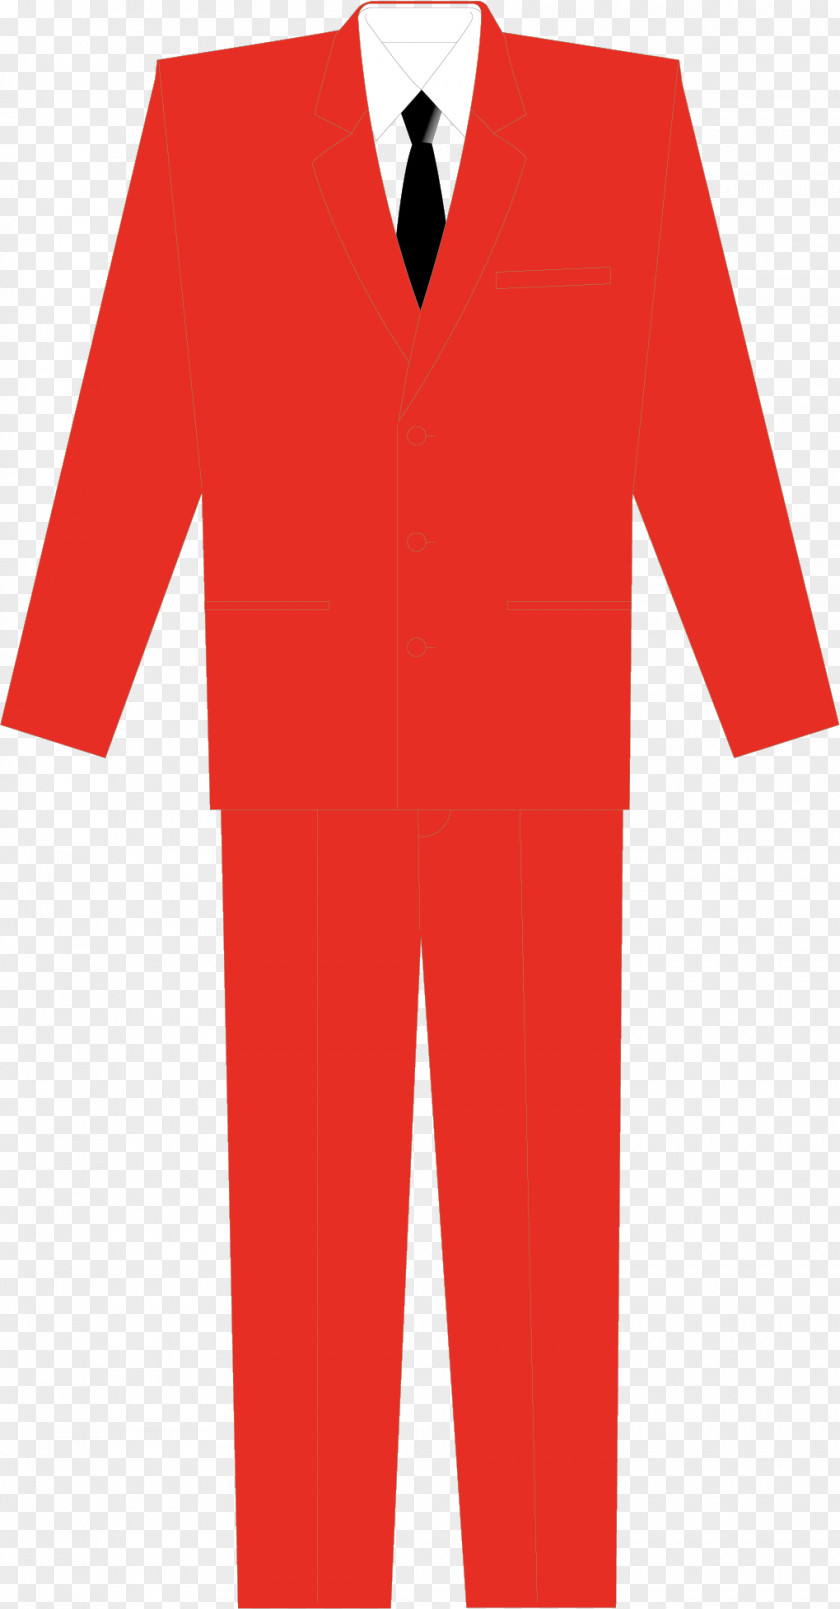 Approved By The Red Suit Tuxedo Clothing Necktie Sleeve PNG